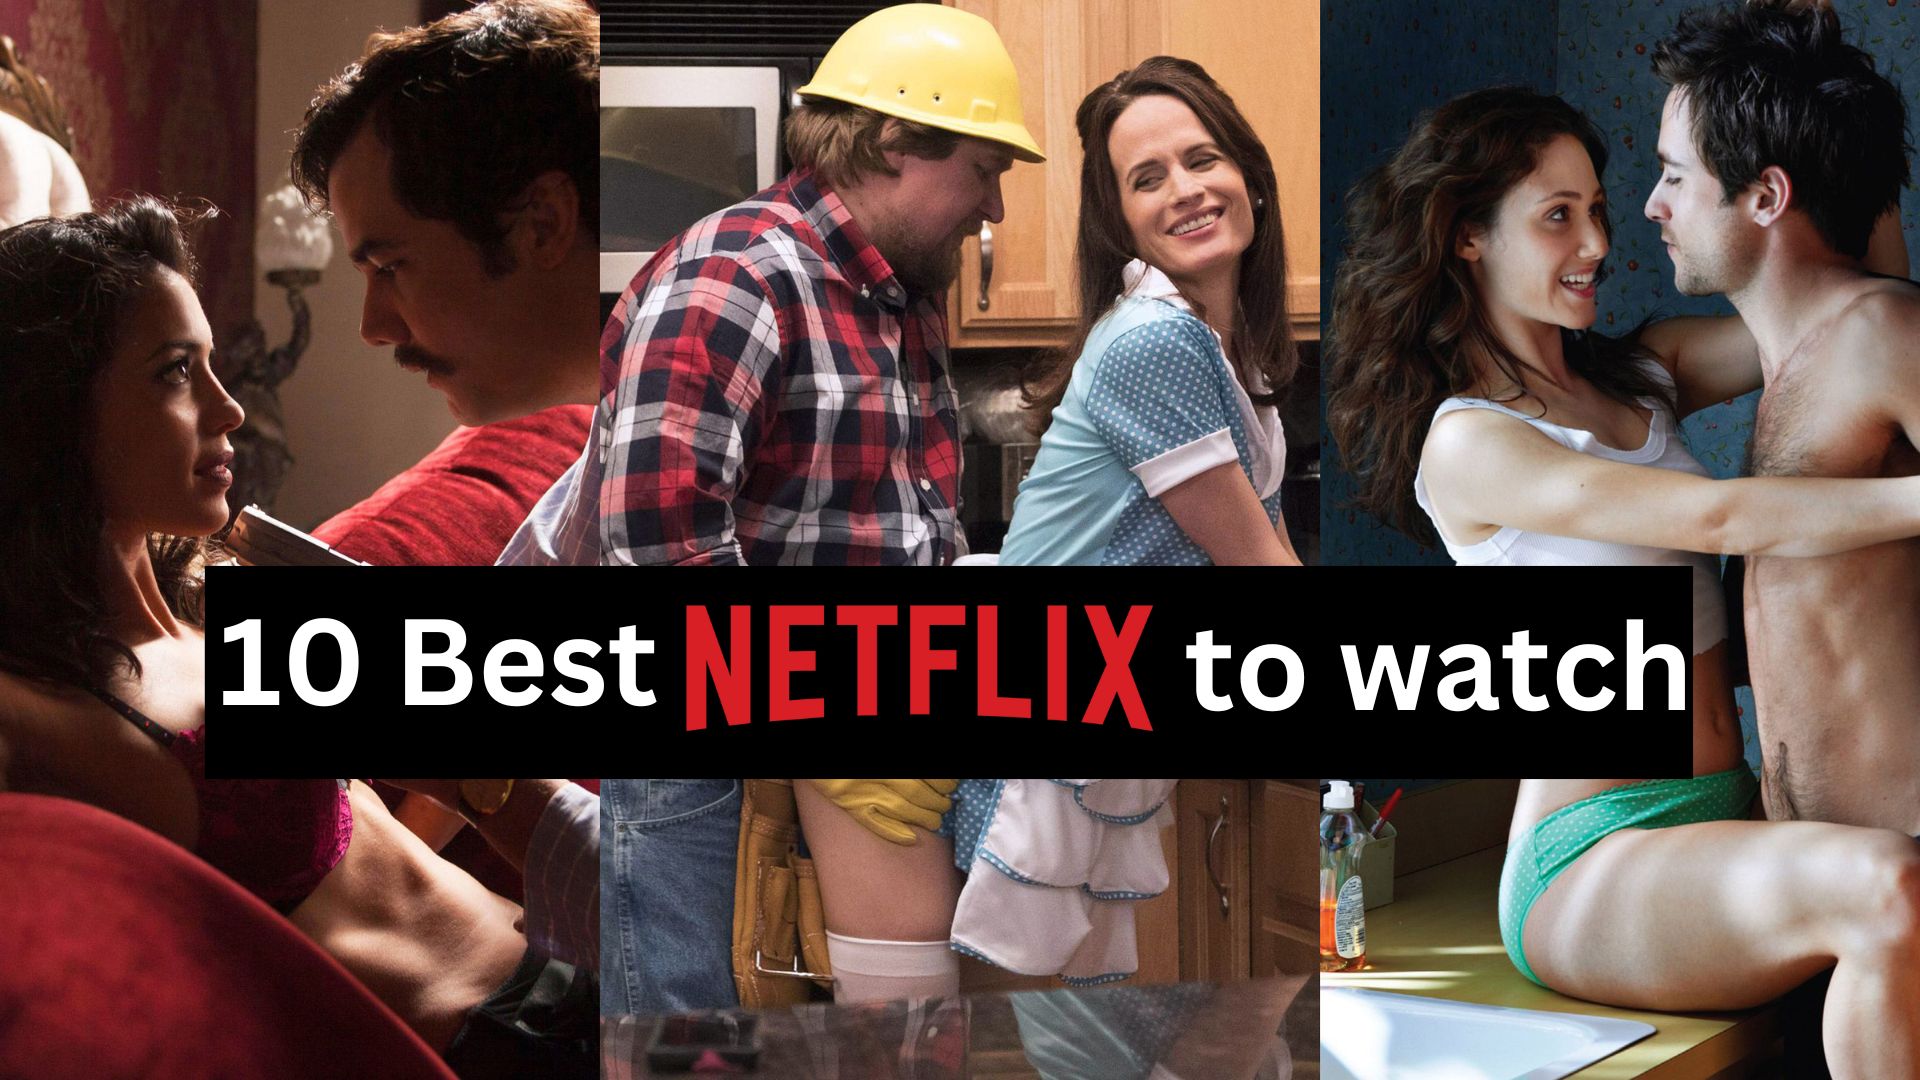 10 Best Netflix Shows For The Travel-obsessed